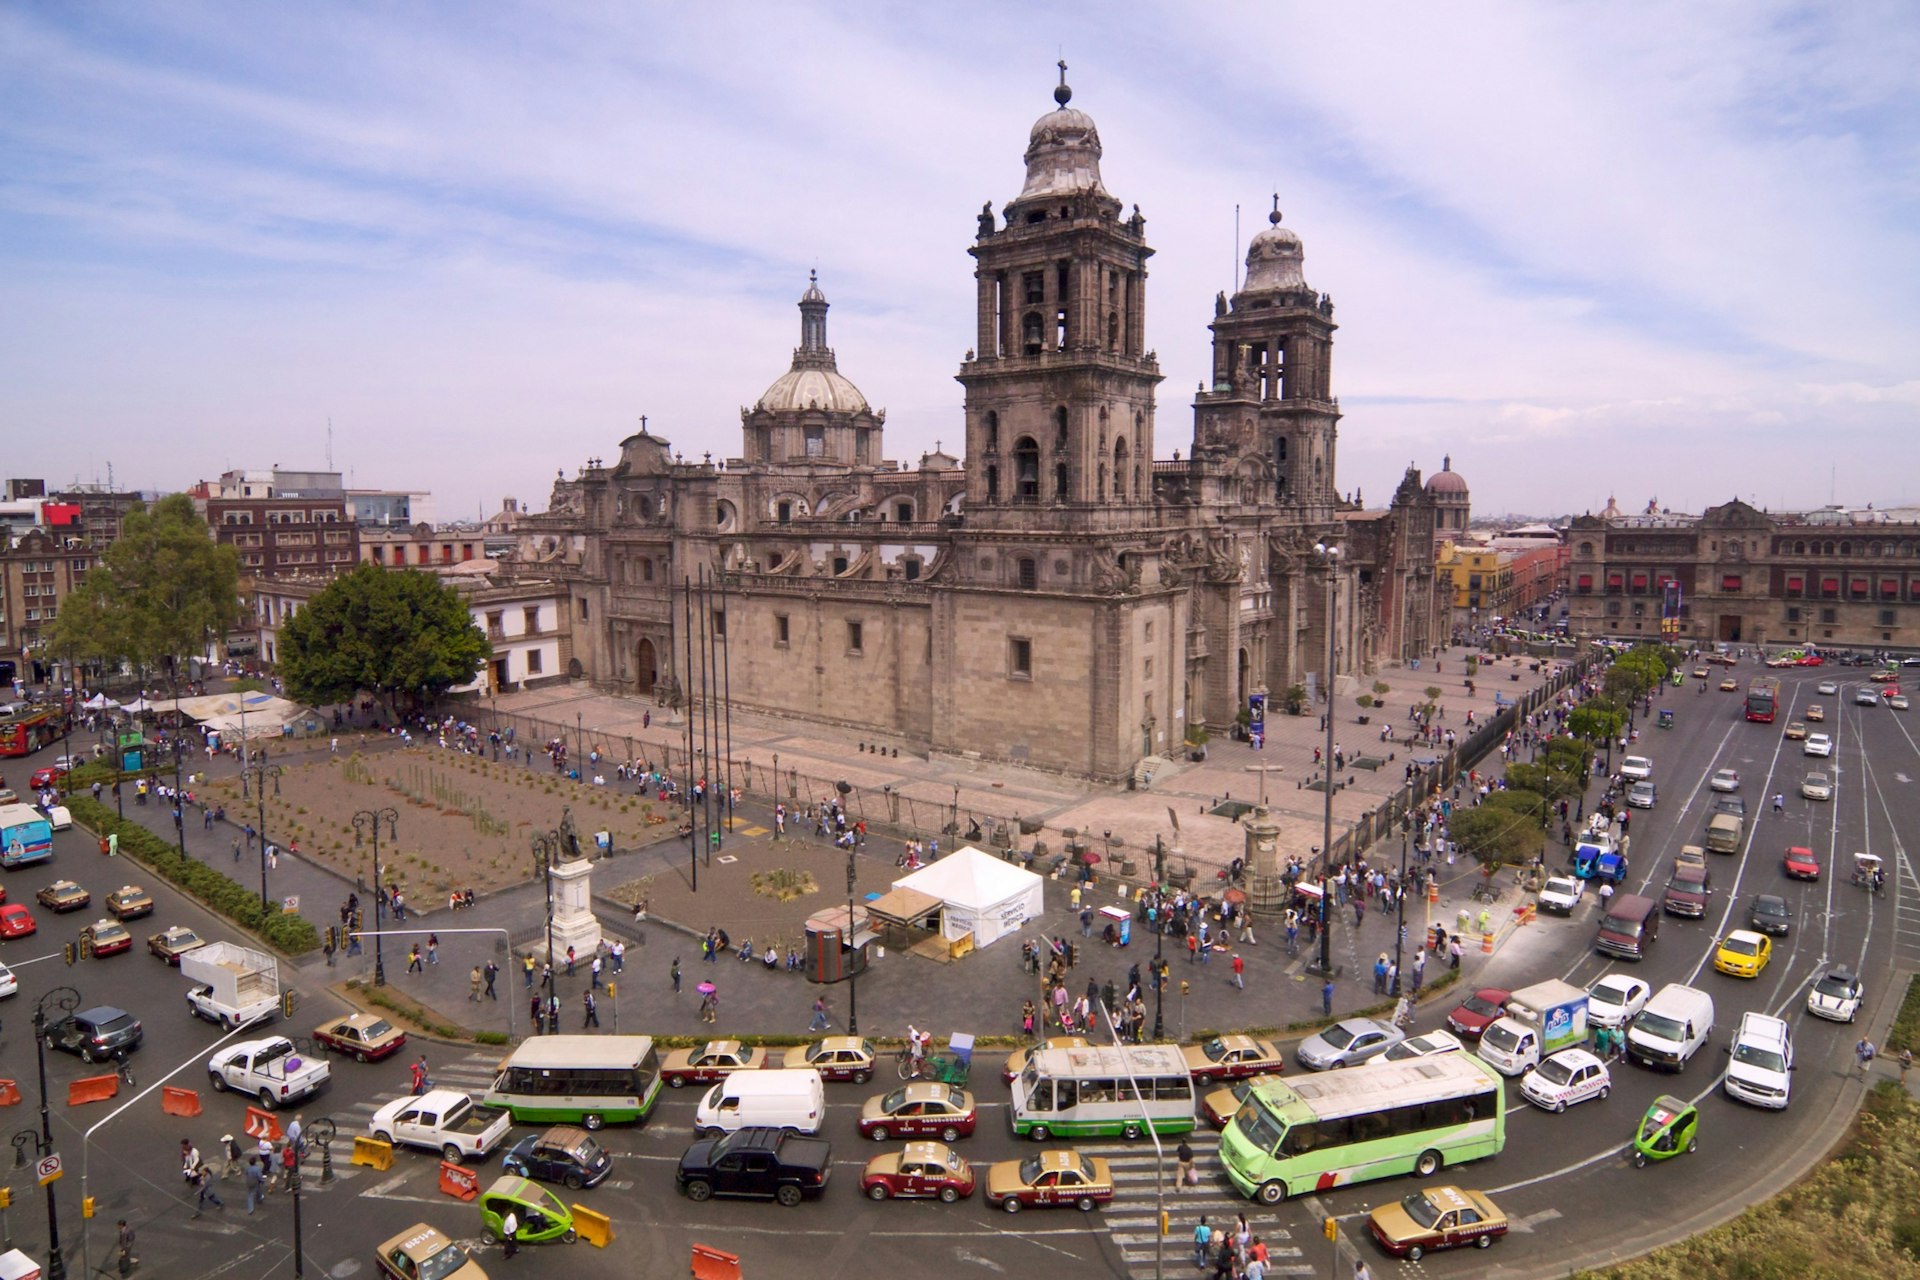 Cars and buses wait in traffic on the roads around Catedral Metropolitana in Mexico City